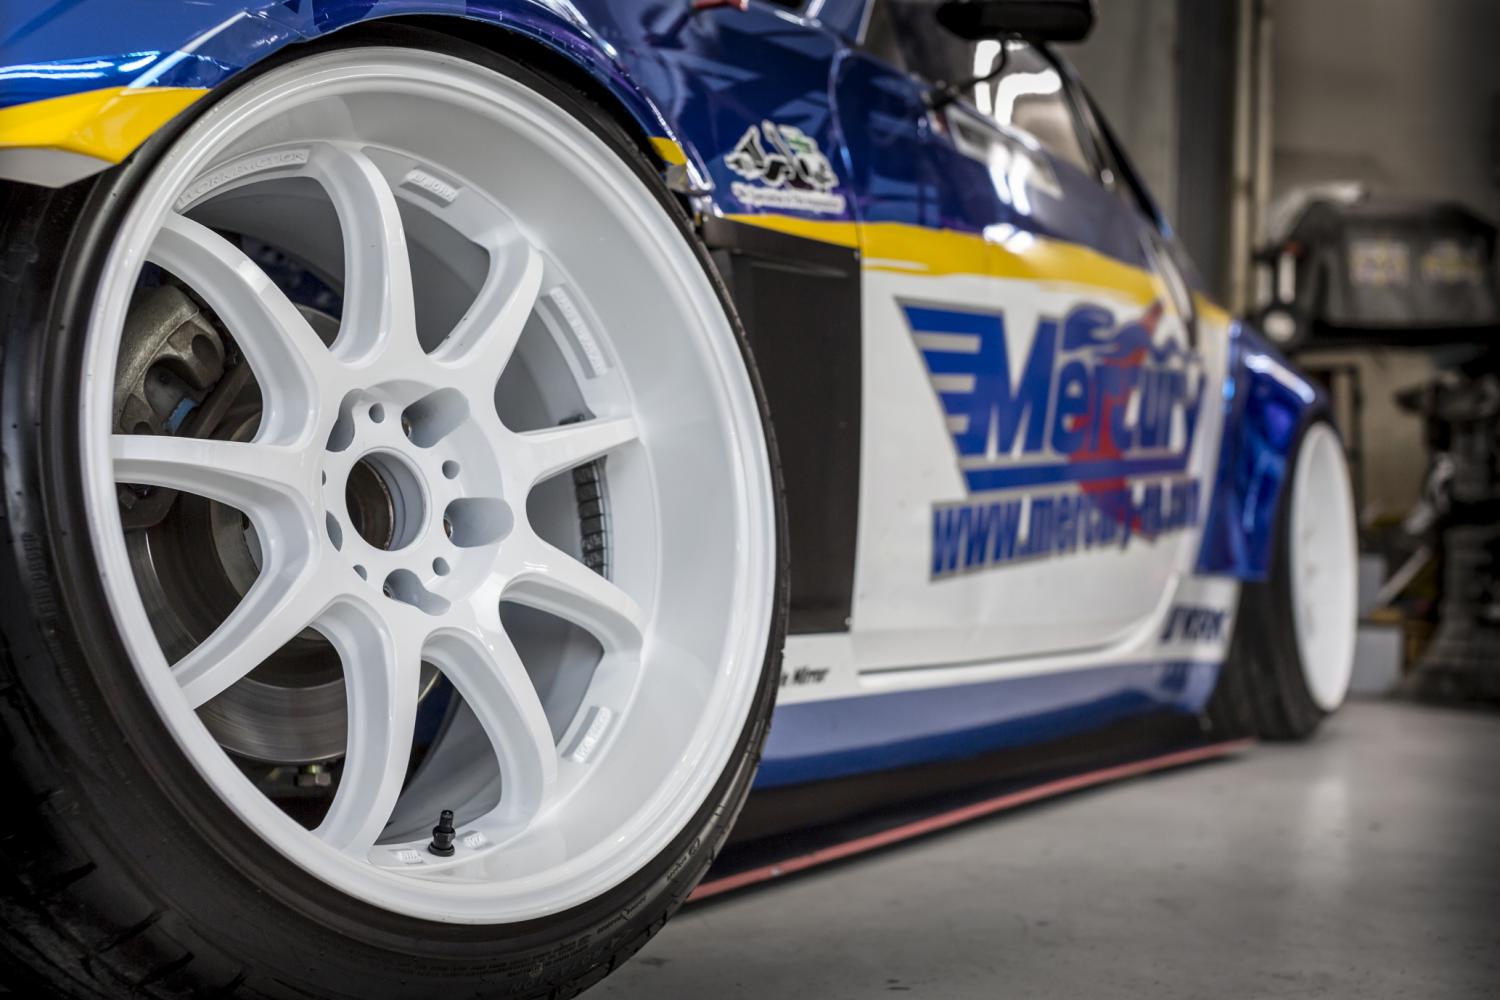 Gallery Vehicles Equipped With WORK Emotion D9R Wheels.